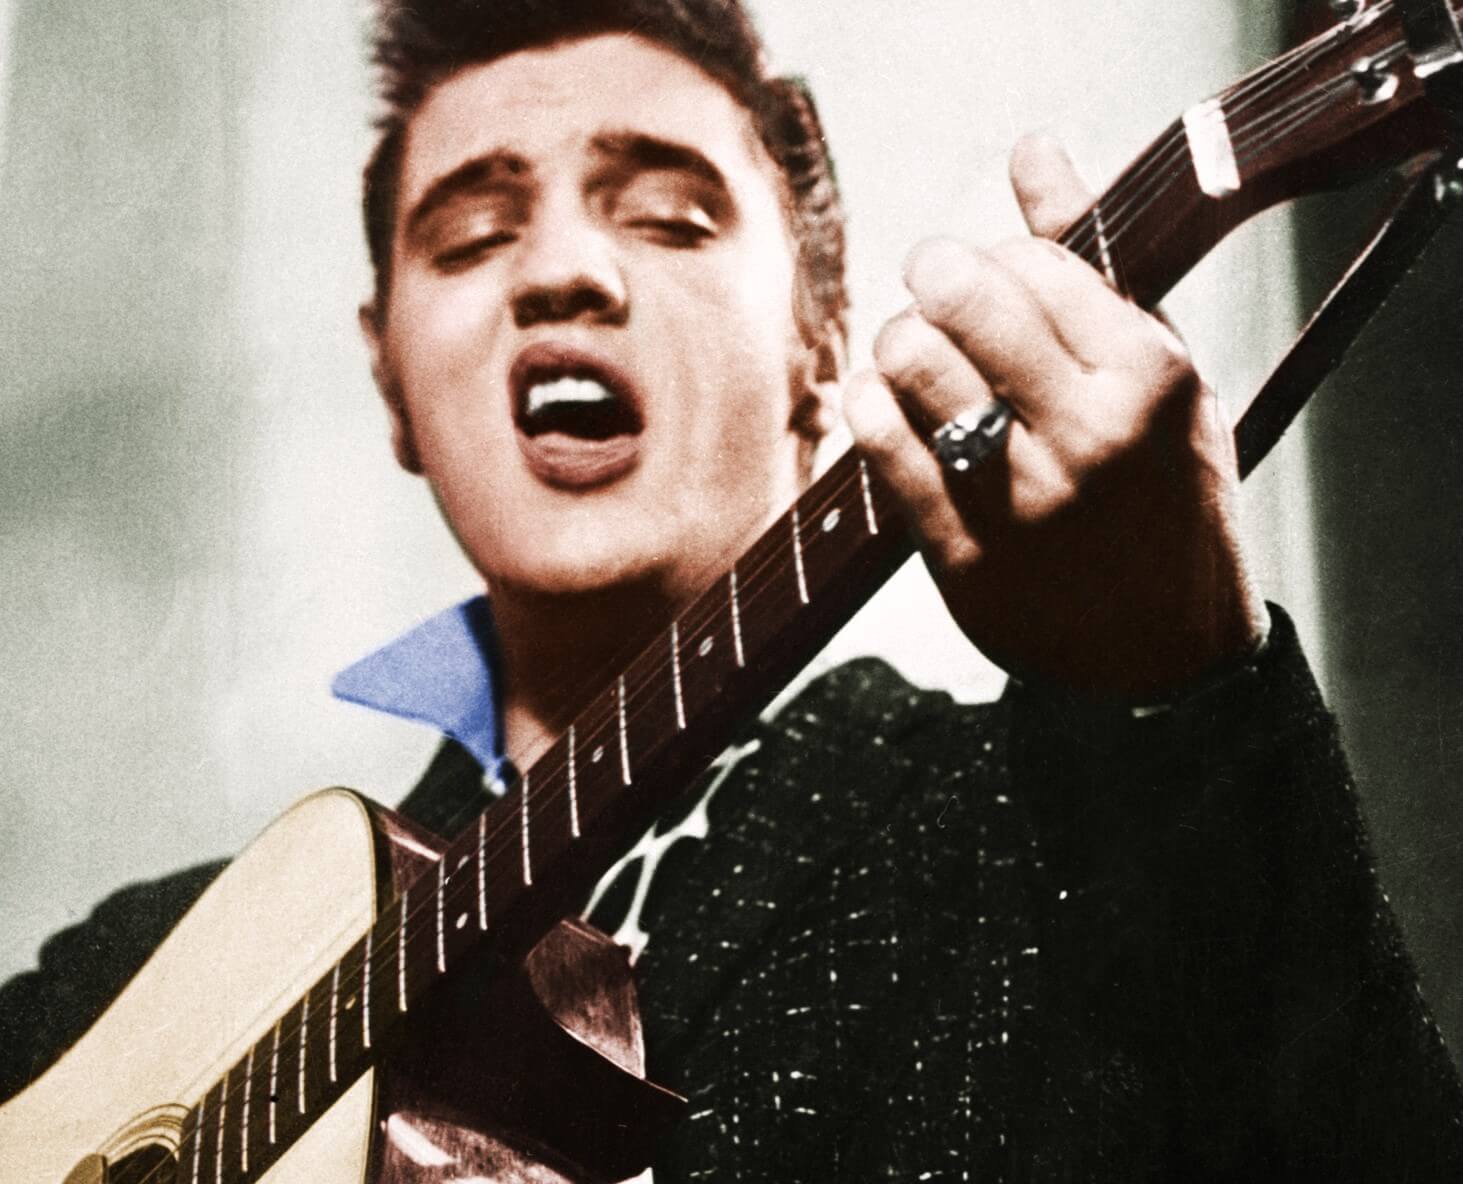 "Are You Lonesome Tonight?" singer Elvis Presley with a guitar